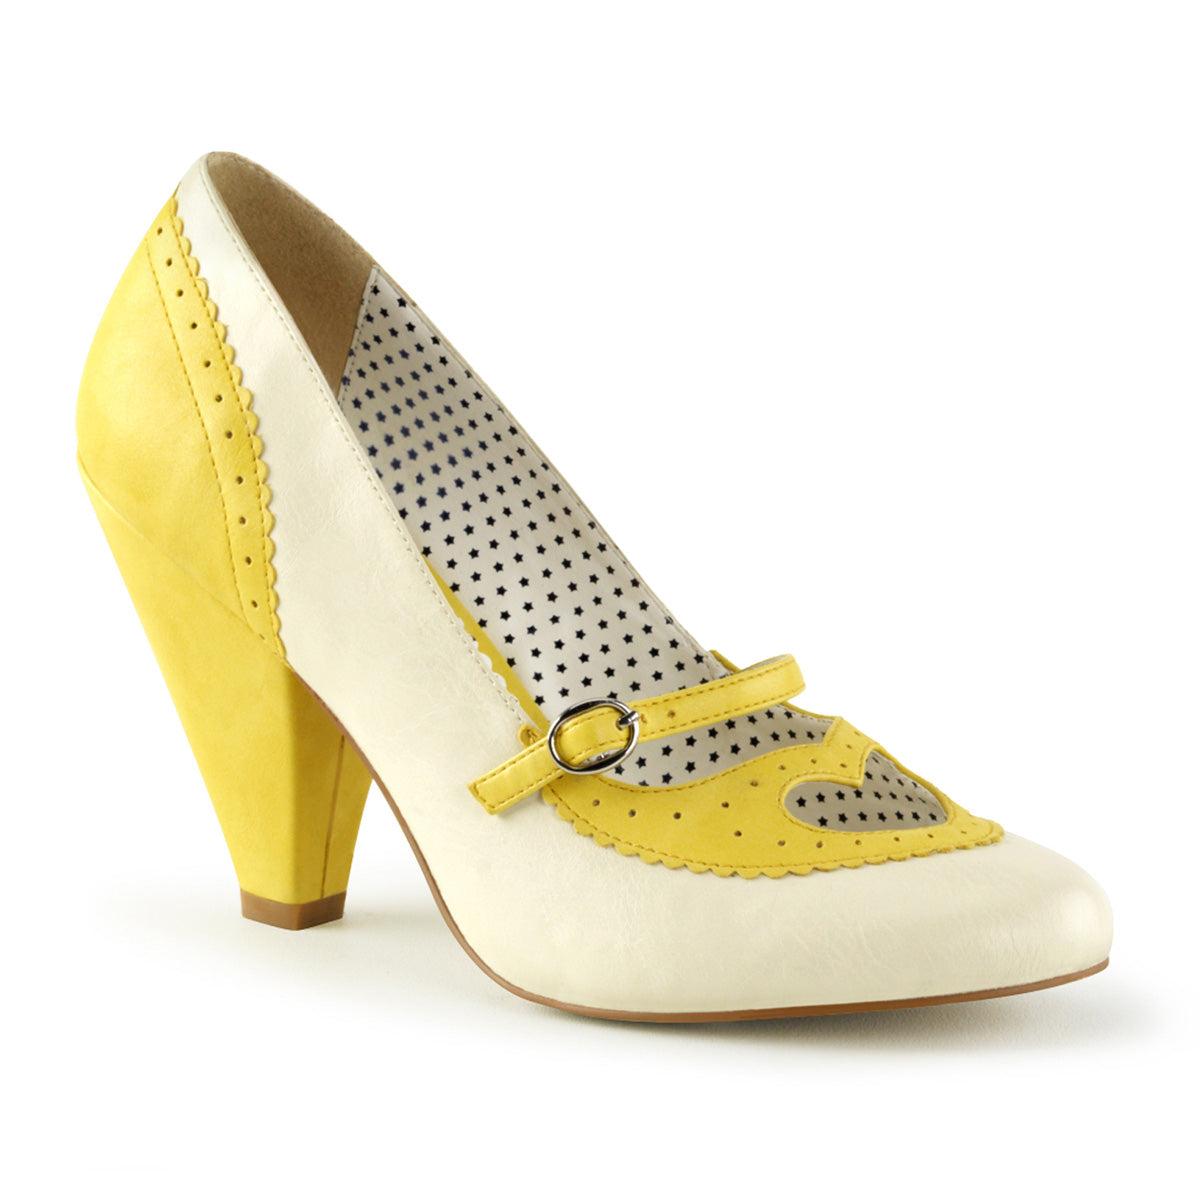 POPPY-18 Pin Up Couture Glamour 4" Heel Yellow Fetish Shoes